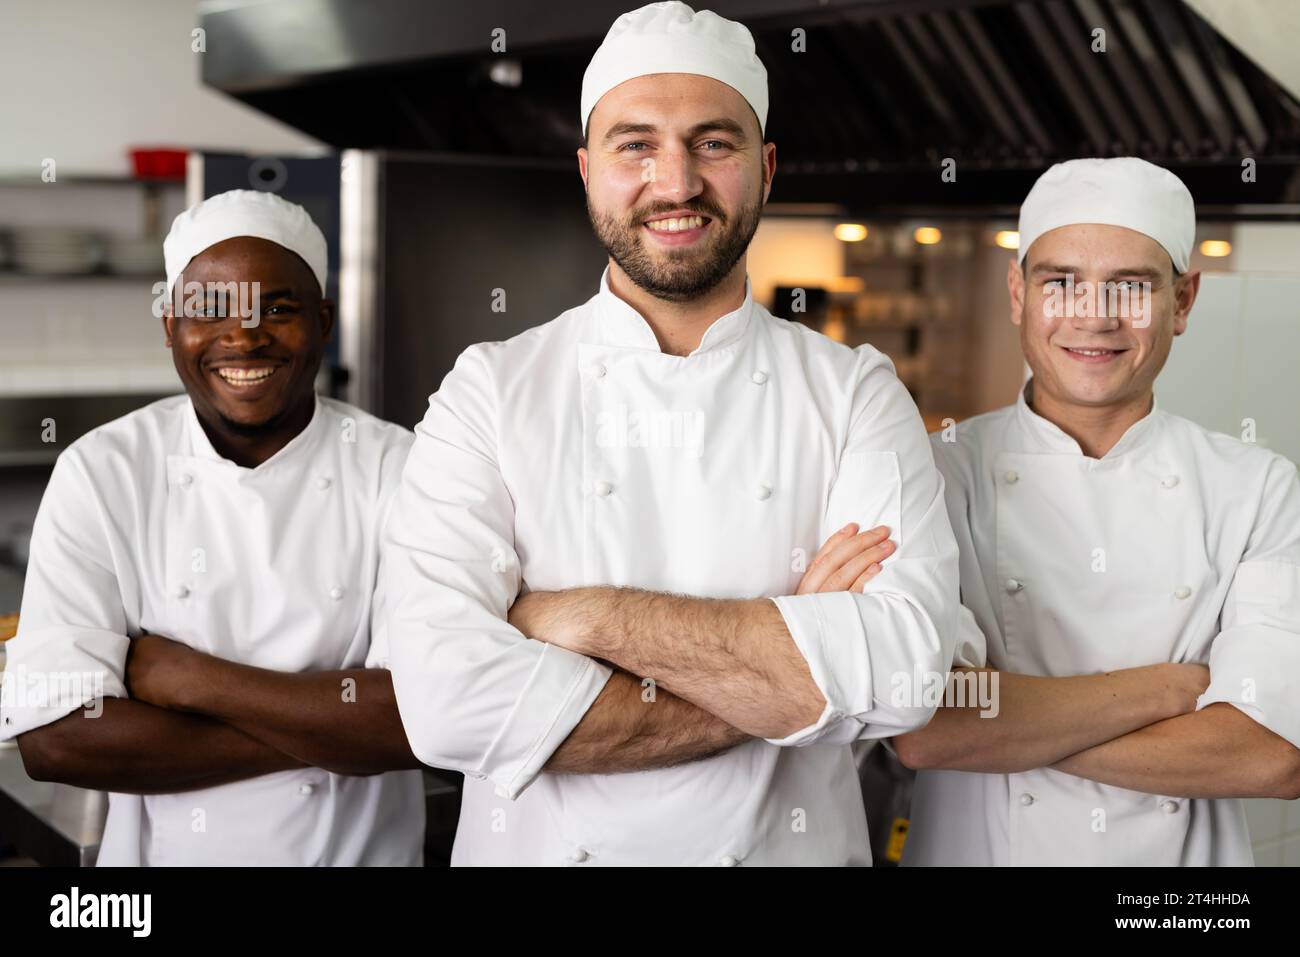 Portrait of smiling diverse male chefs with arms crossed standing side by side in commercial kitchen Stock Photo